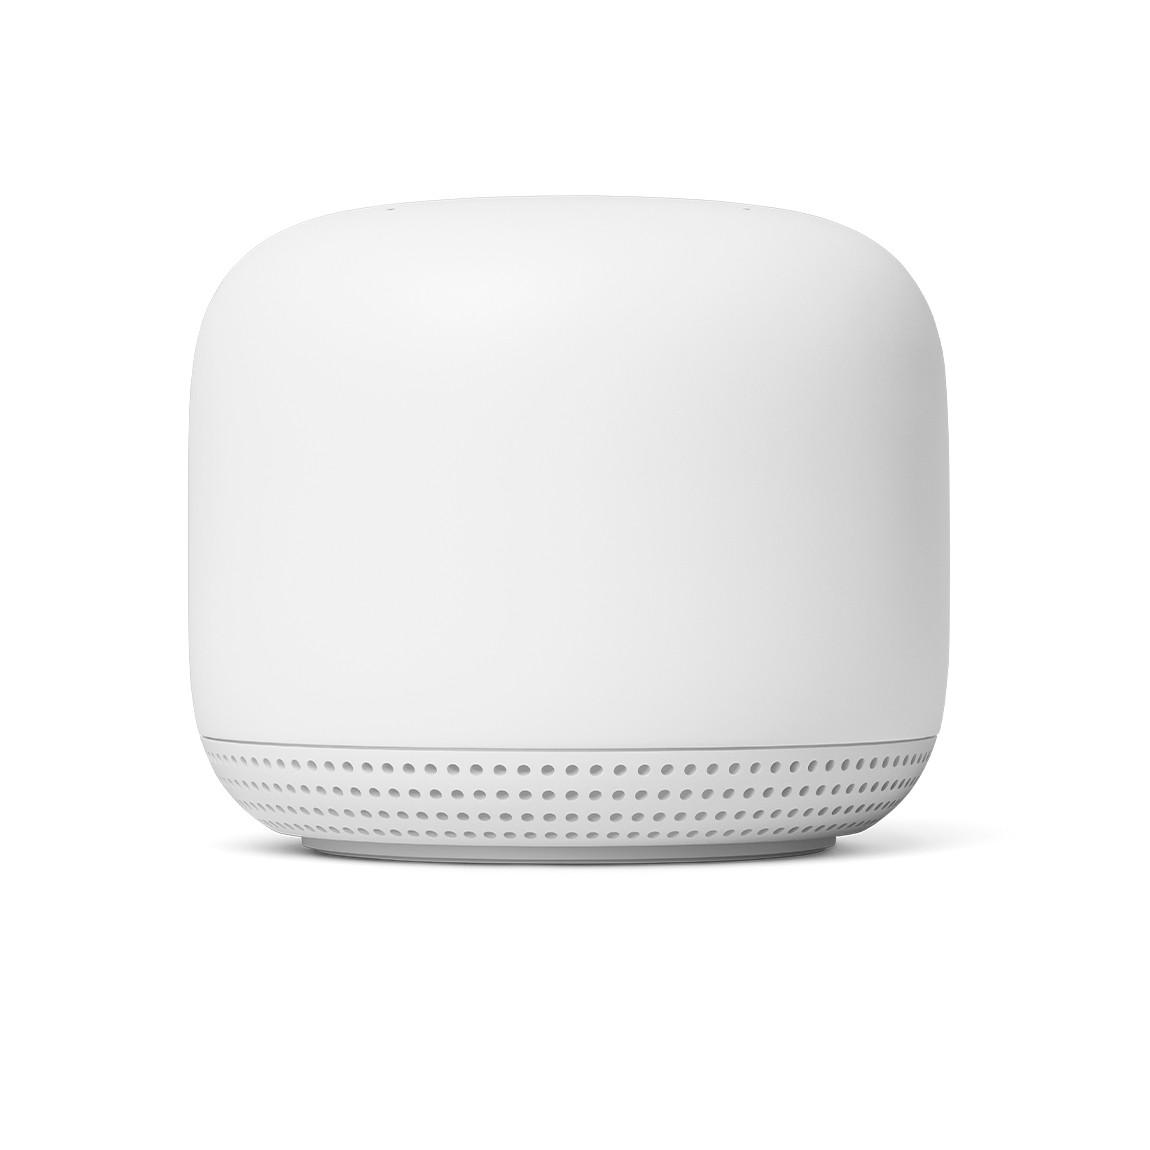 Google Nest Access Point frontal 